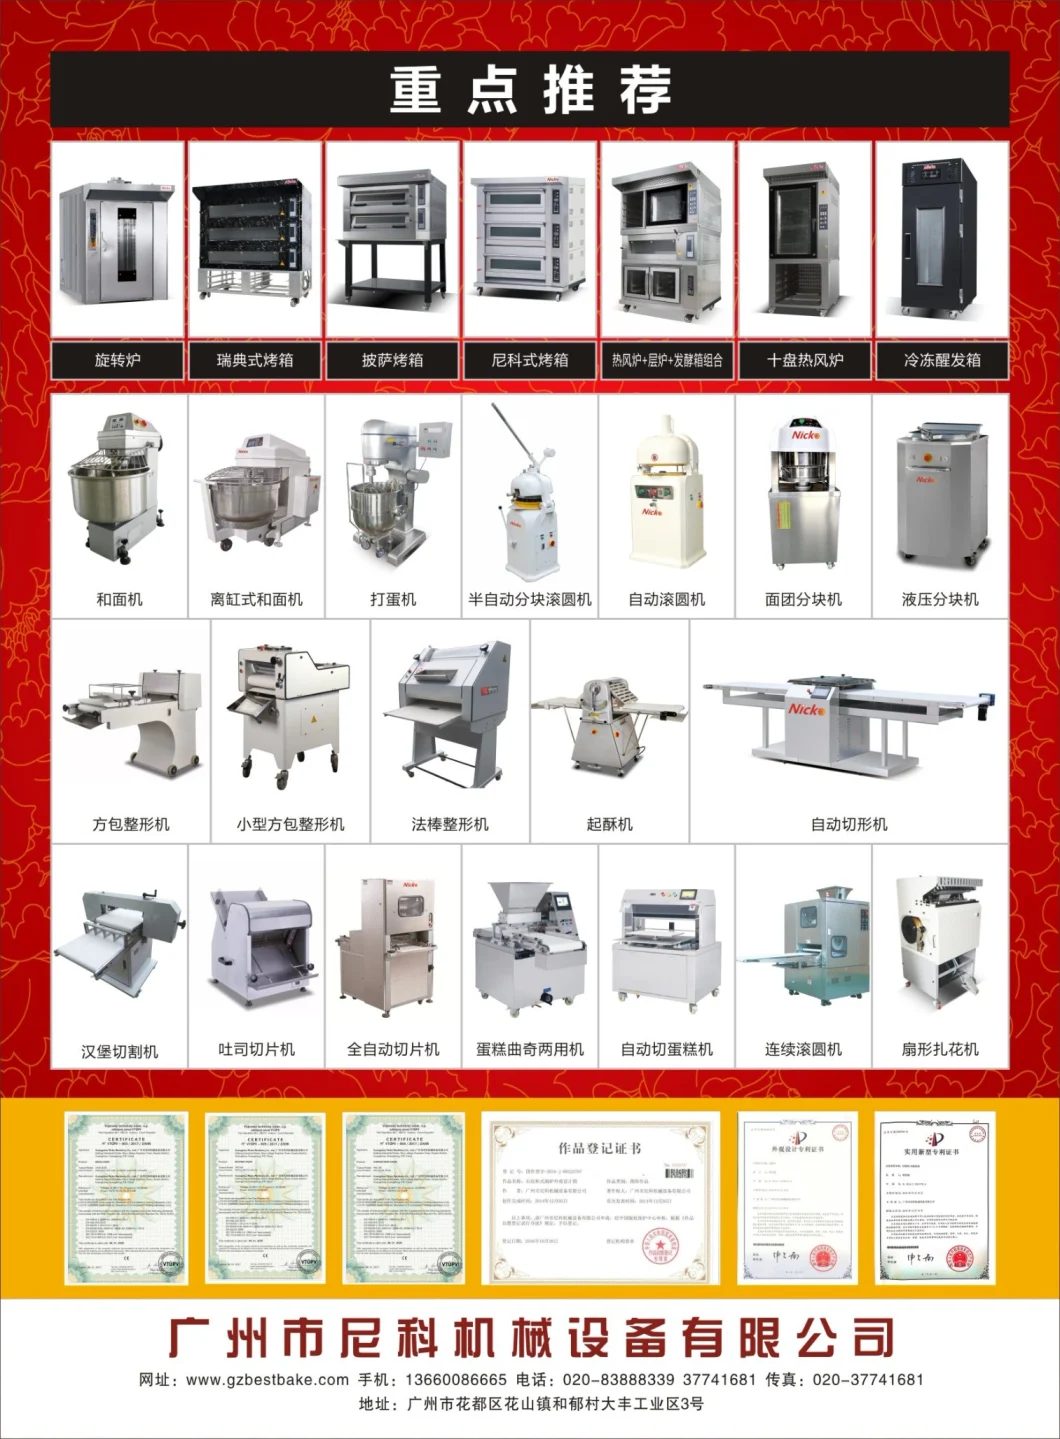 New Industrial Electric Biscuit Mini Bakery Automatic Pita Bread Cookie Used Toast Bread Tunnel Oven Machine